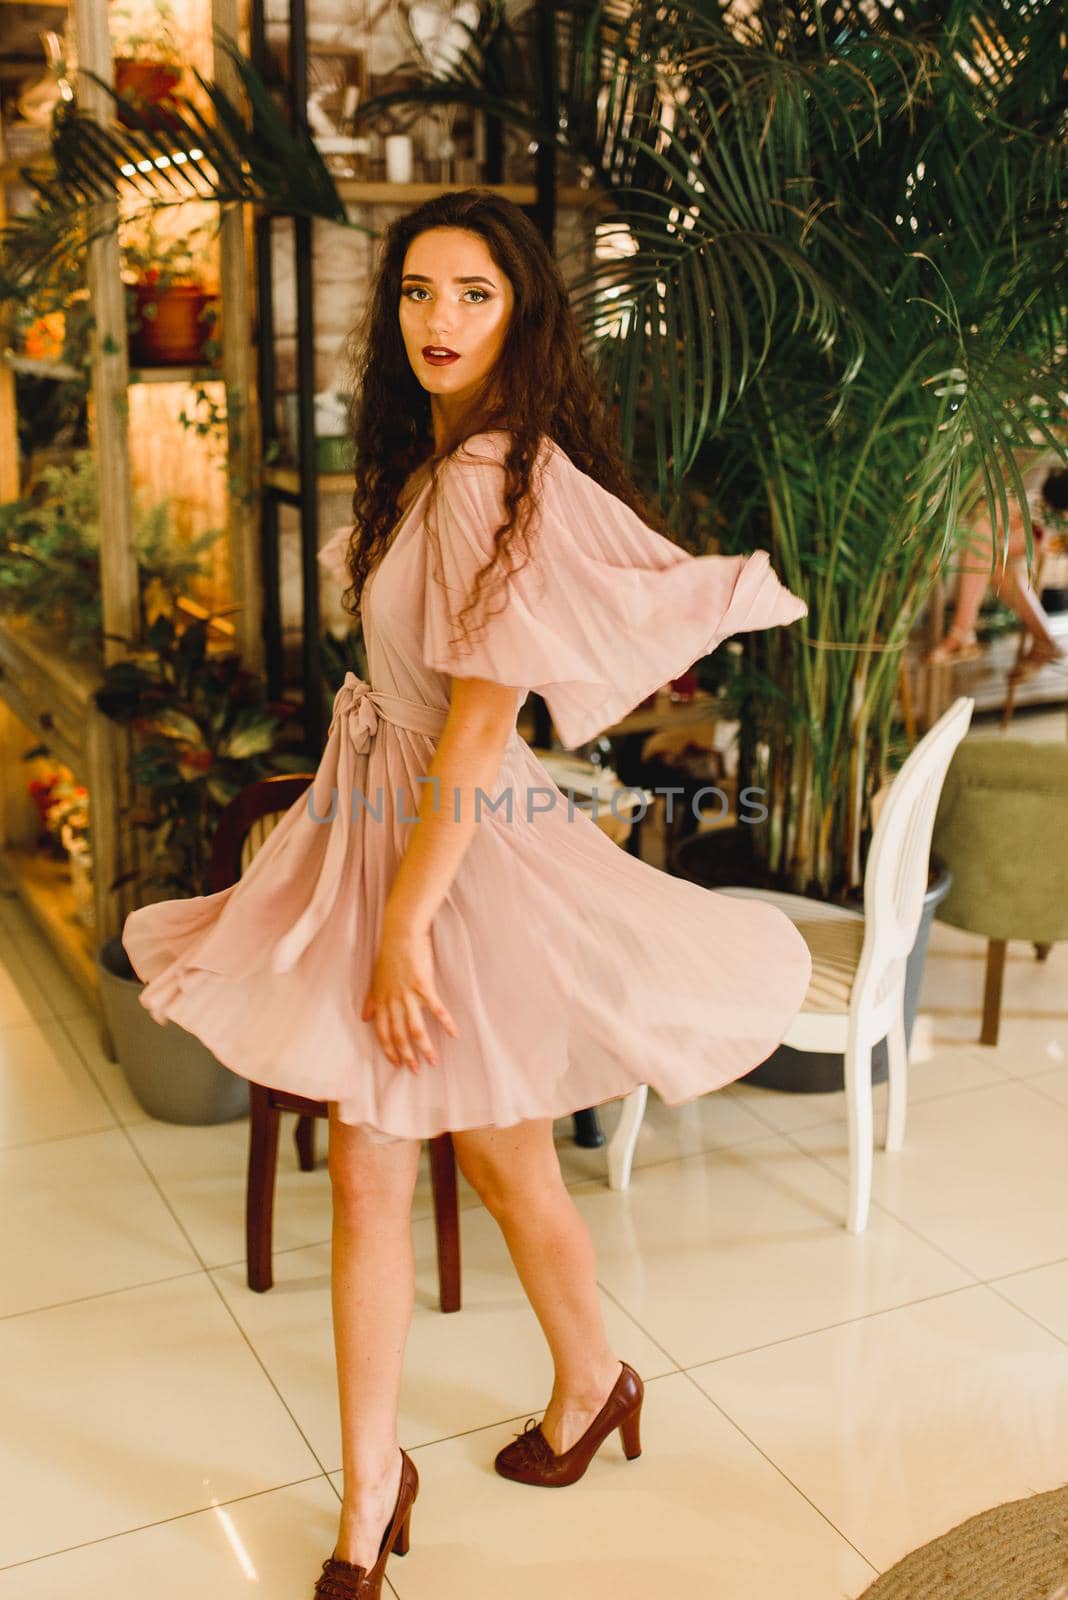 Young woman in soft pink dress is moving and looking into the camera. Beauty girl in cafe with big green plants